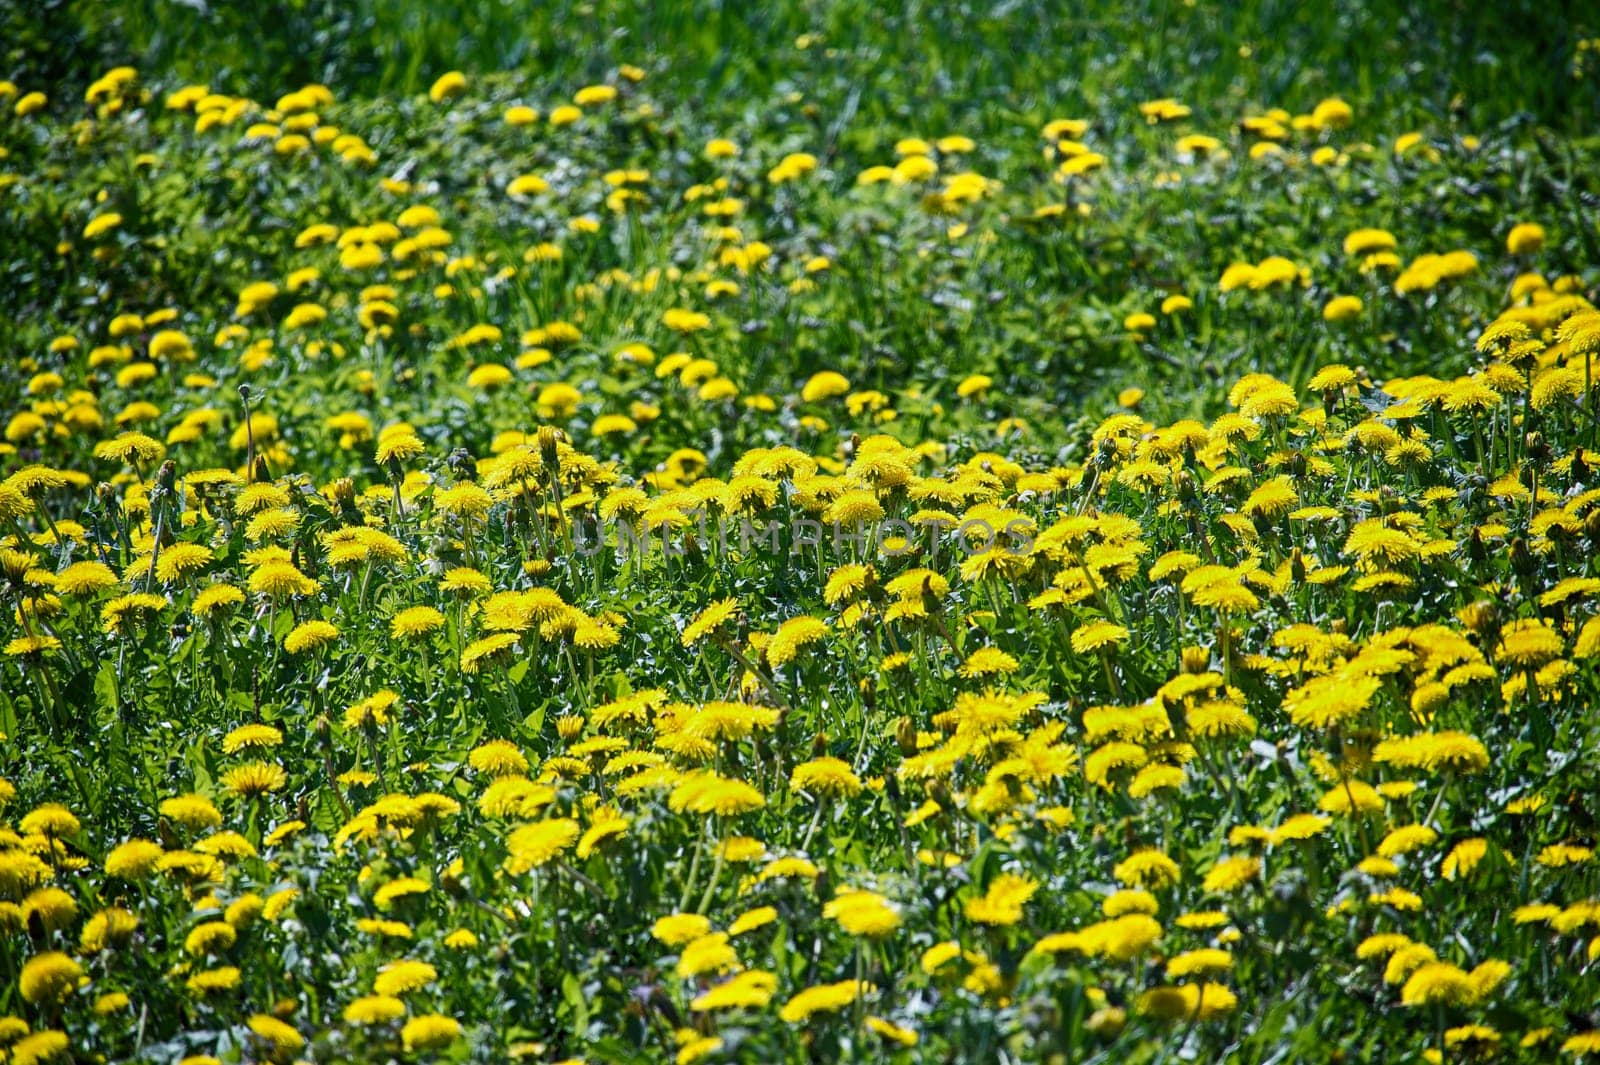 Meadow teeming with yellow dandelions amidst green grass, creates a vibrant landscape of yellow and green that extends into the distance